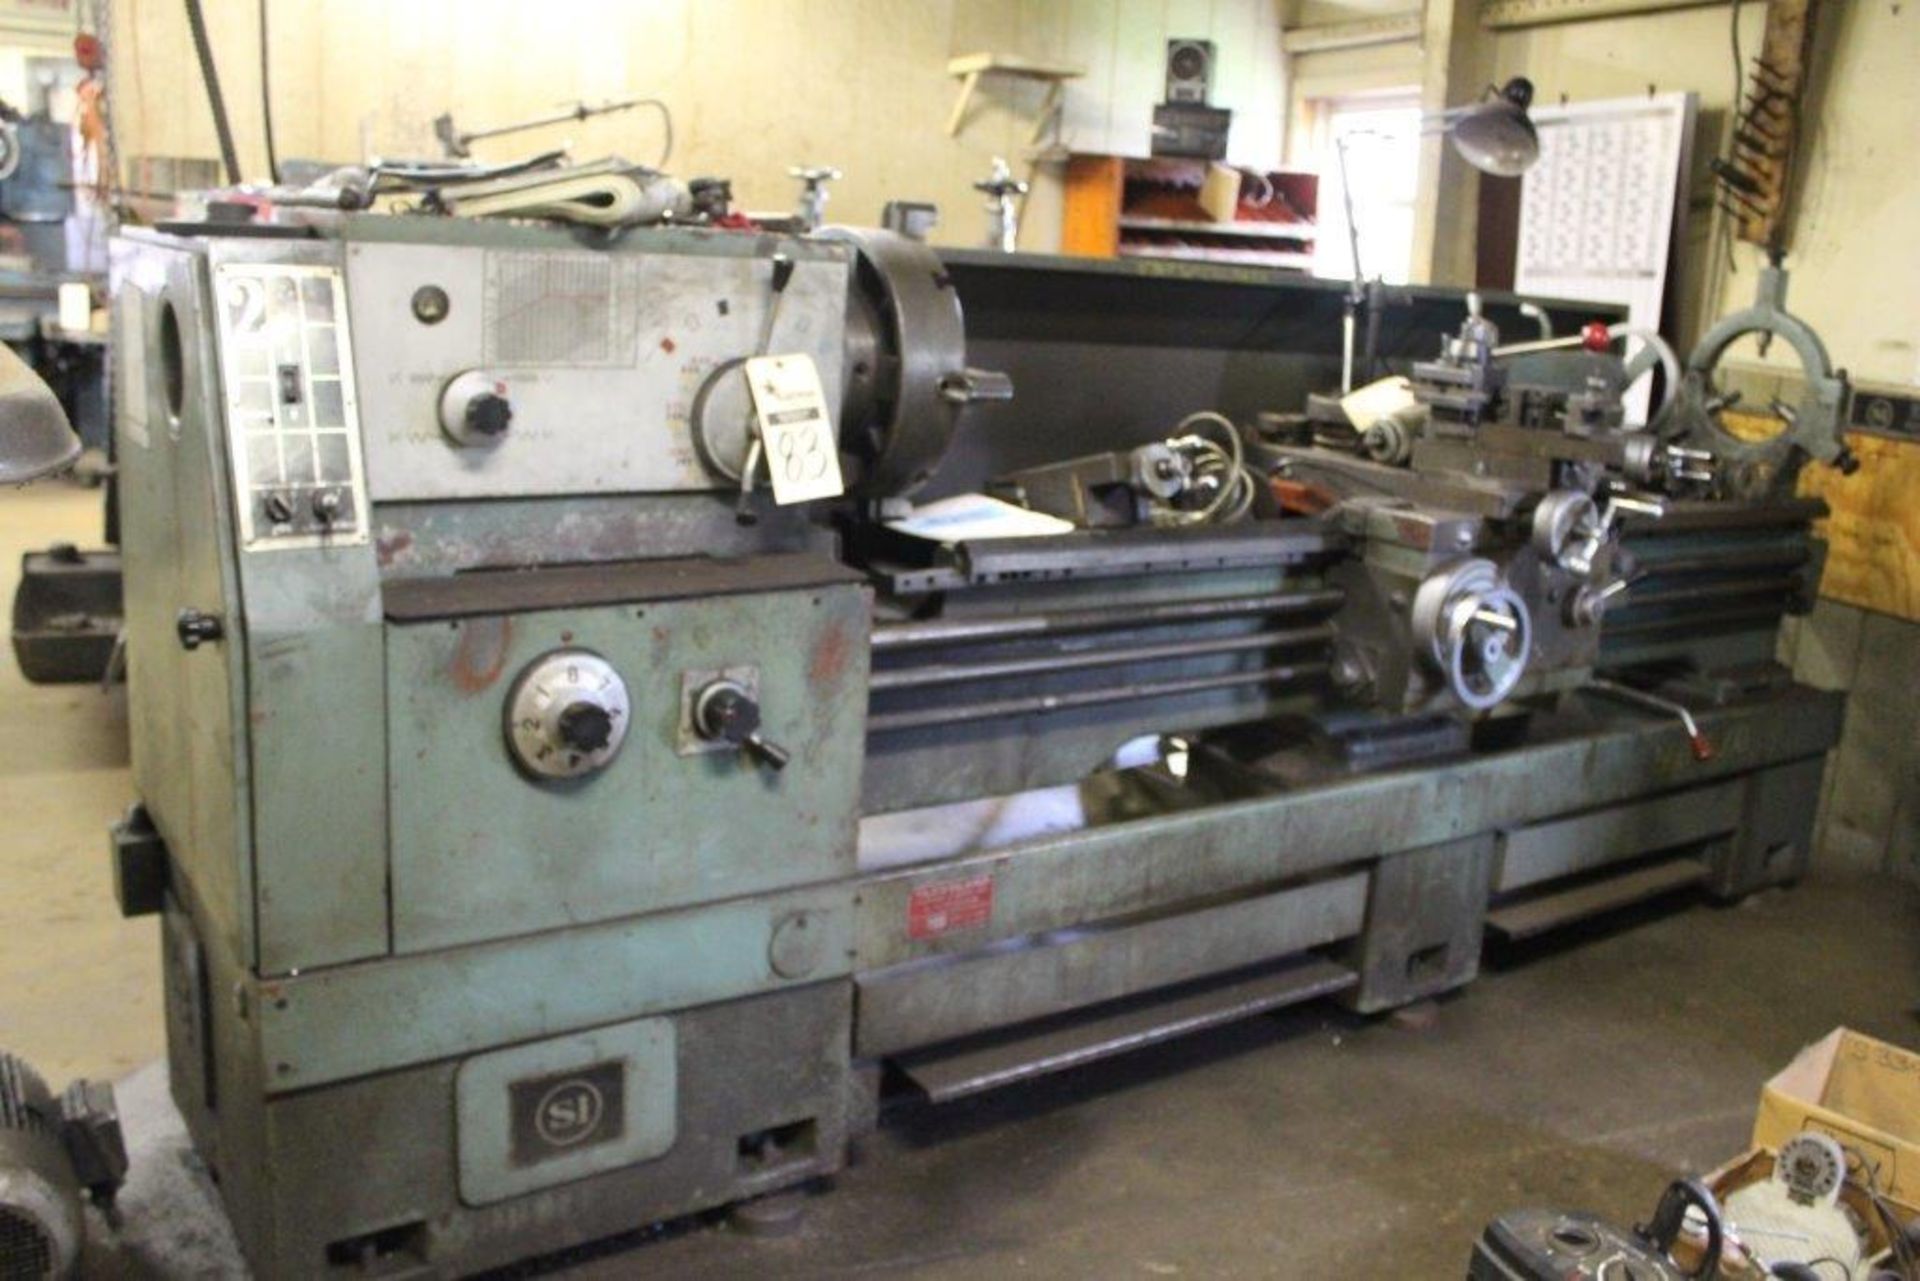 Hercules Gap Lathe- 20" swing, 7' bed with taper attachment and spare motors